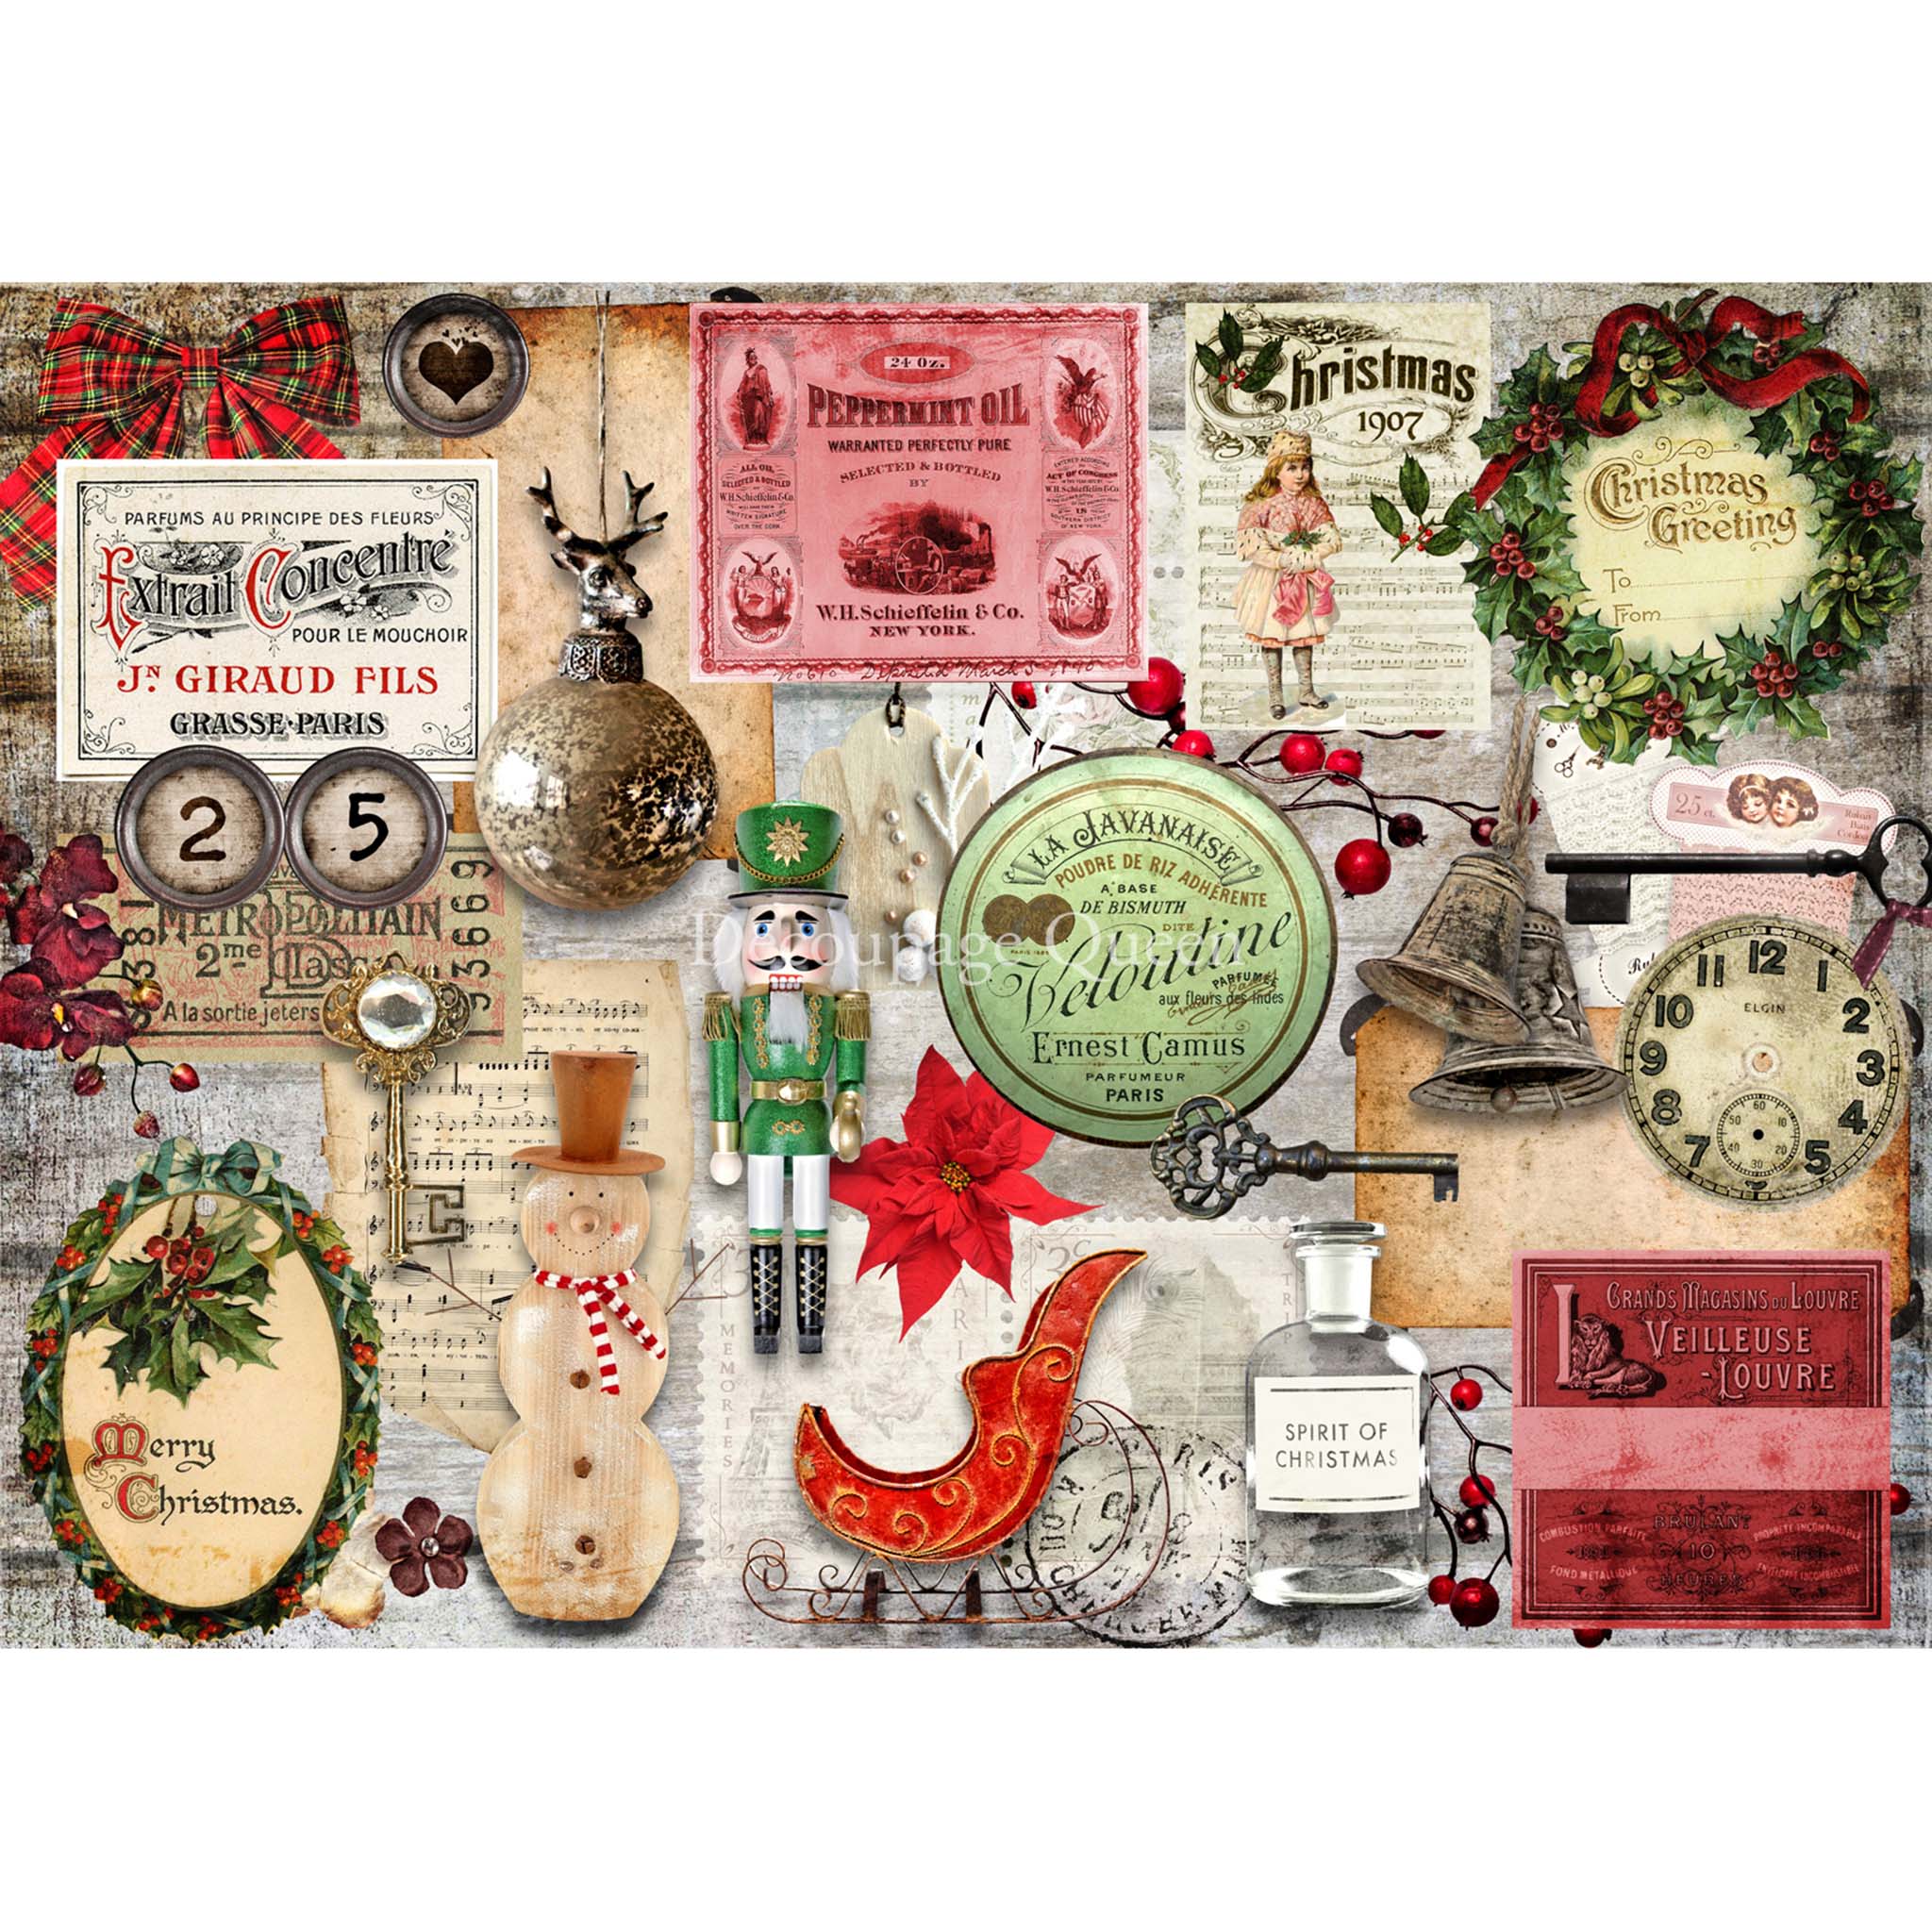 A4 rice paper that features a collage of vintage Christmas decorations, ornaments, and sheet music White borders are on the top and bottom.